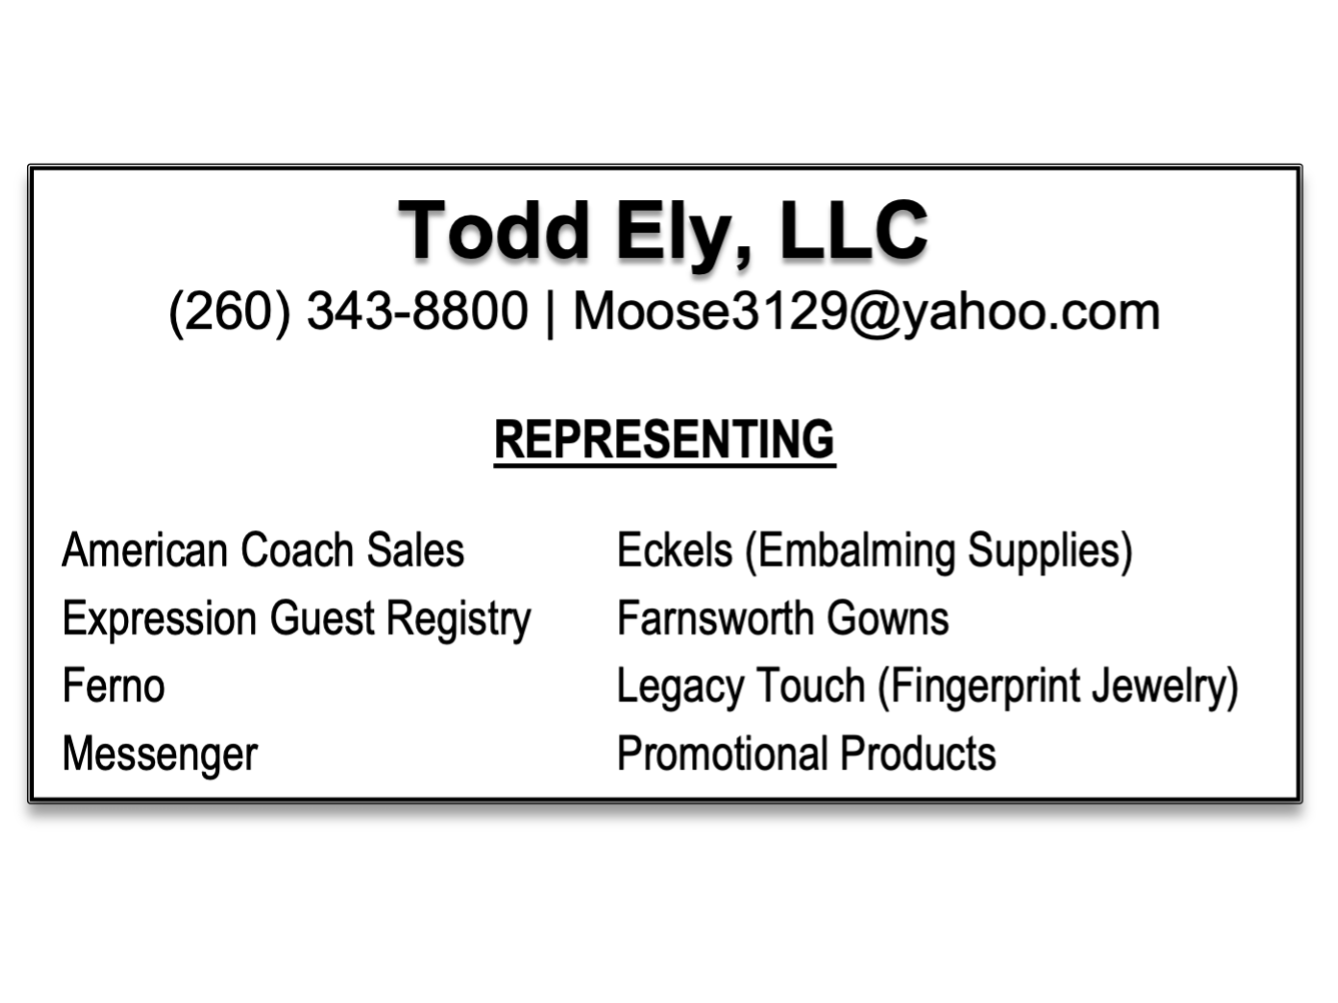 Todd Ely